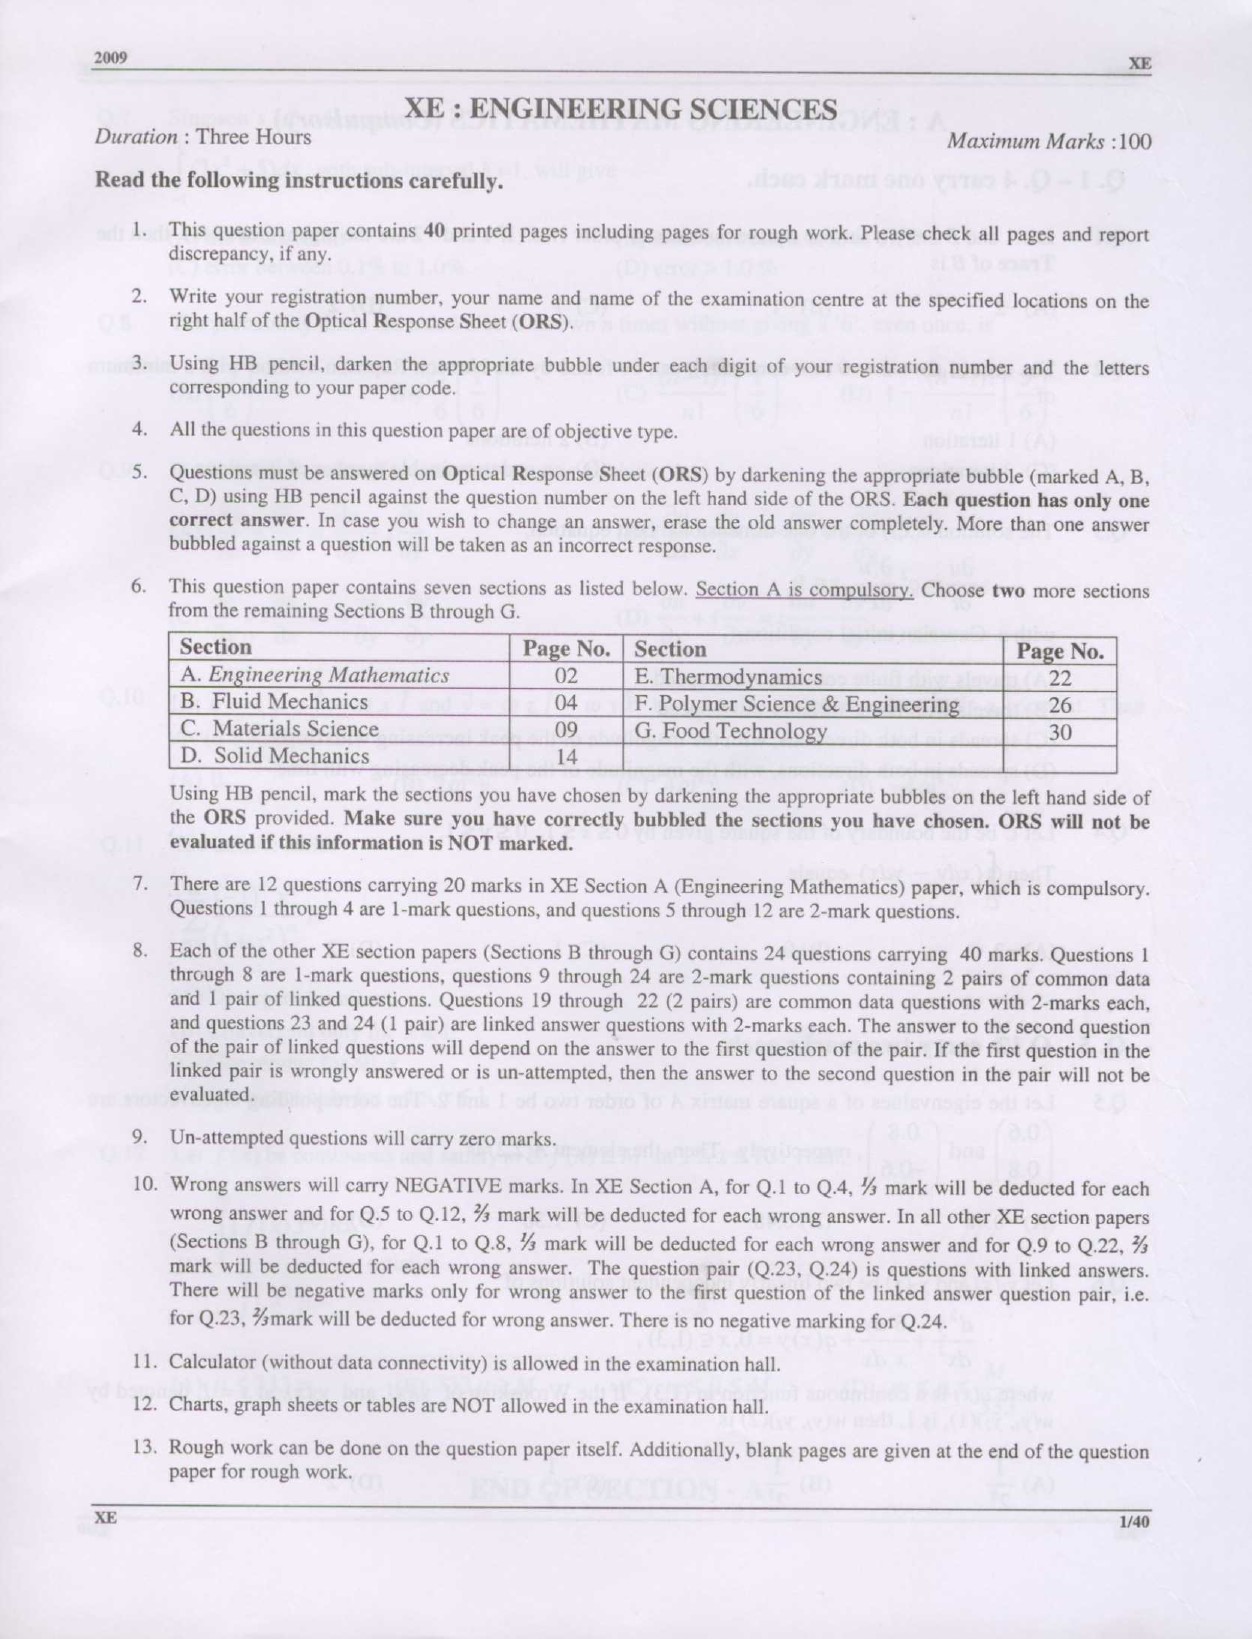 GATE Exam Question Paper 2009 Engineering Sciences 1